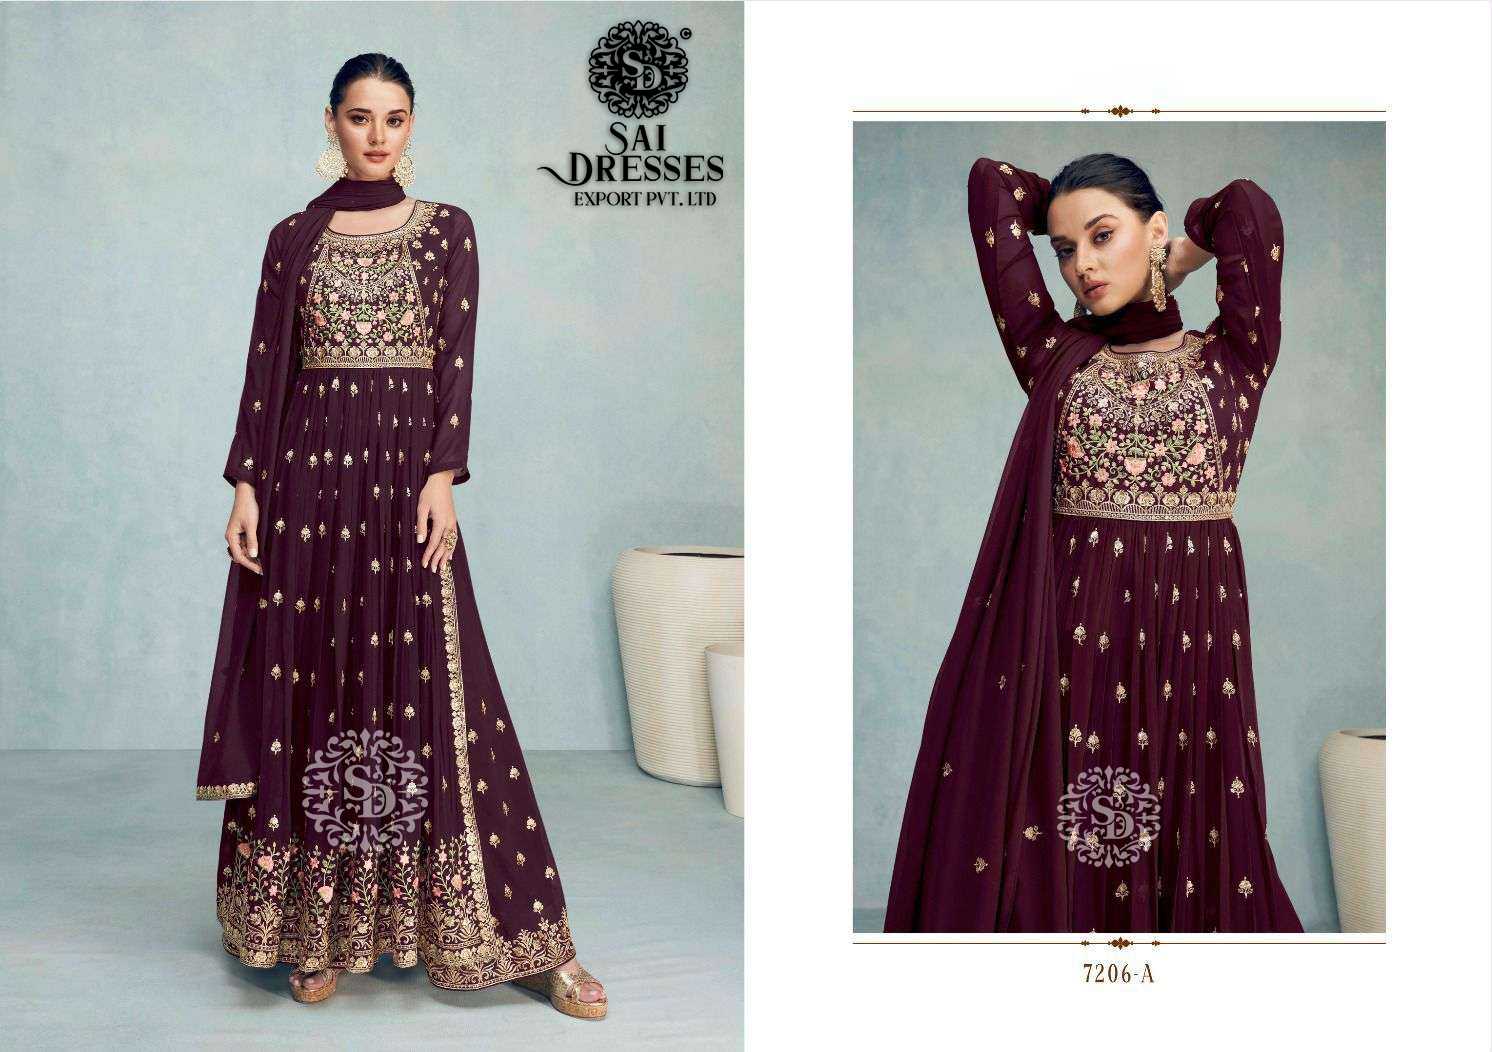 SAI DRESSES PRESENT NAYRA VOL 6 READYMADE FESTIVE WEAR NAYRA CUT WITH PLAZZO STYLE DESIGNER 3 PIECE SUITS IN WHOLESALE RATE IN SURAT